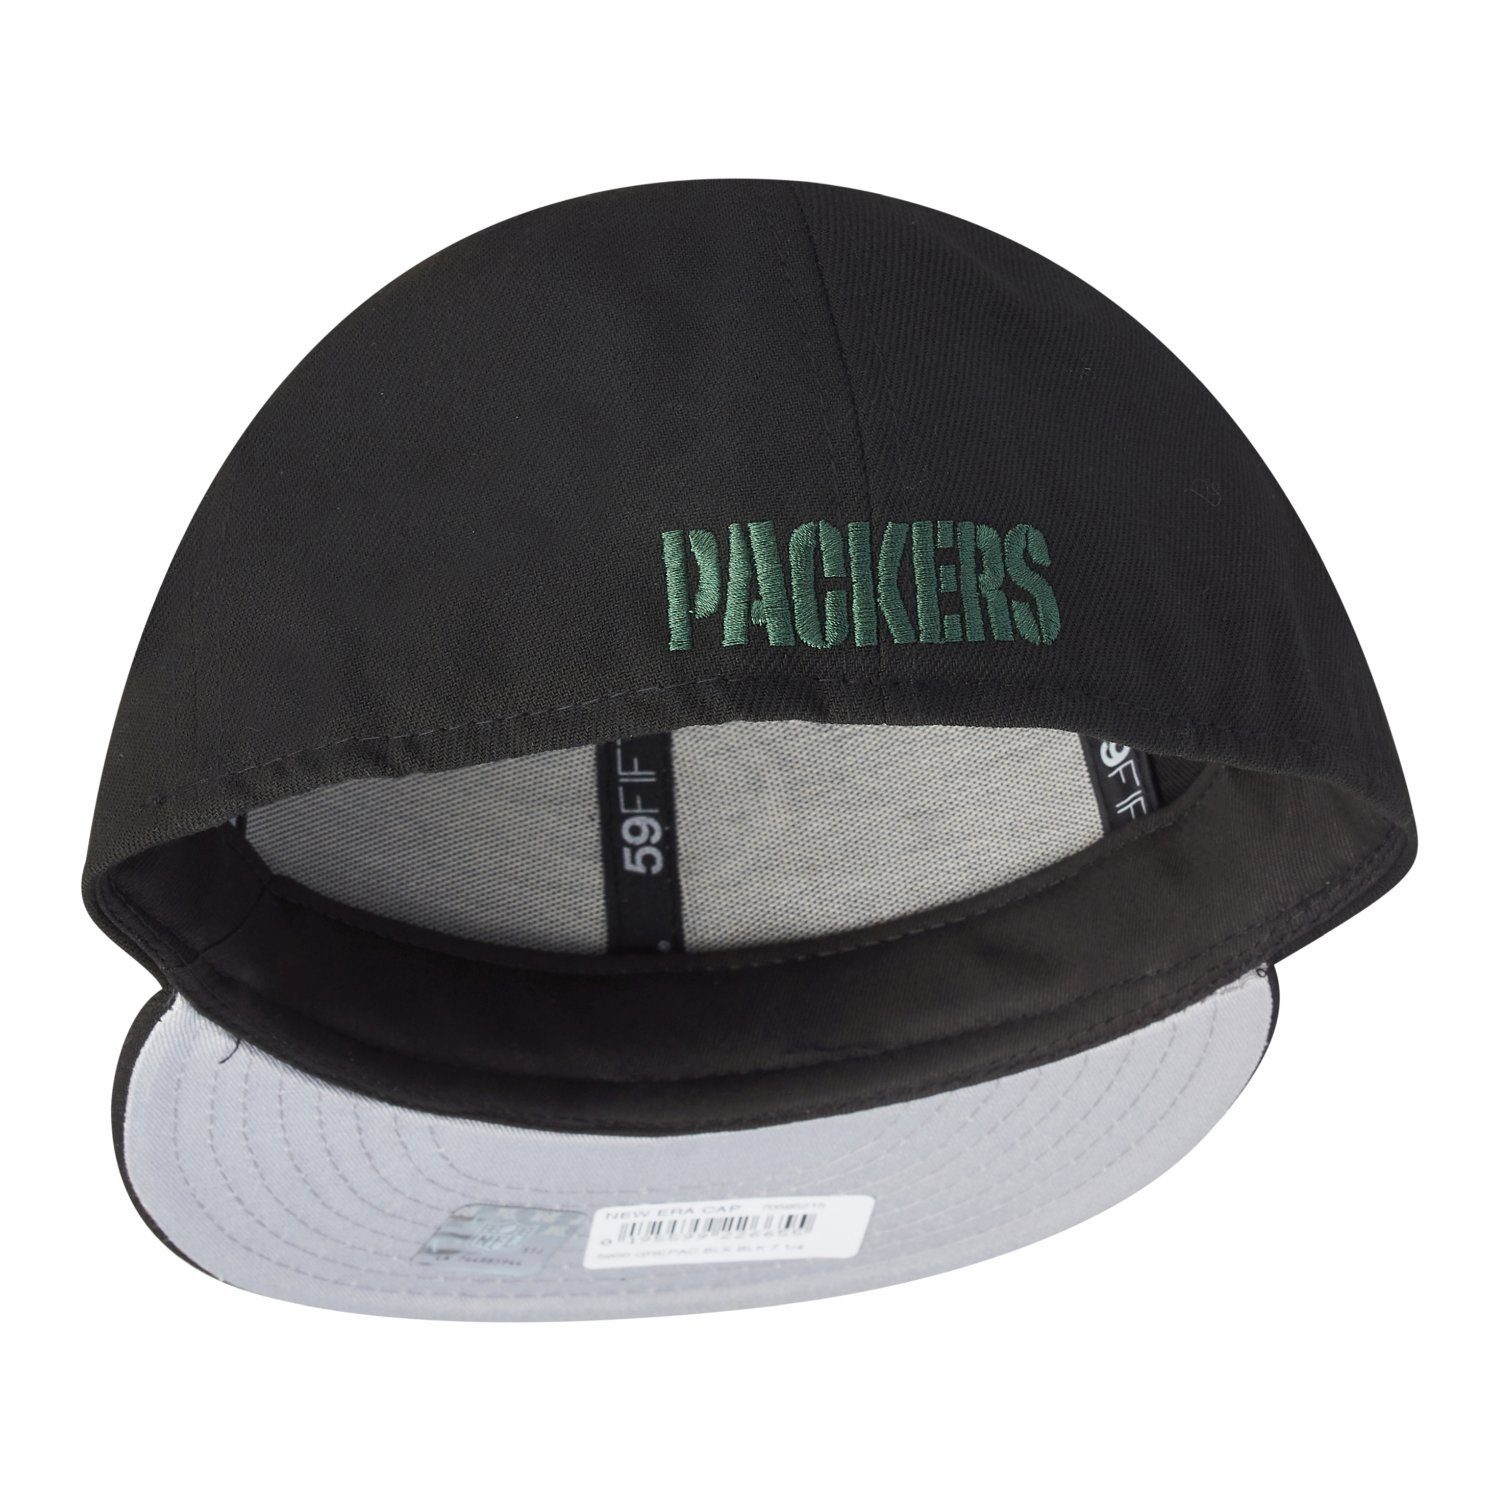 Green Fitted 59Fifty New Bay Era Packers Cap